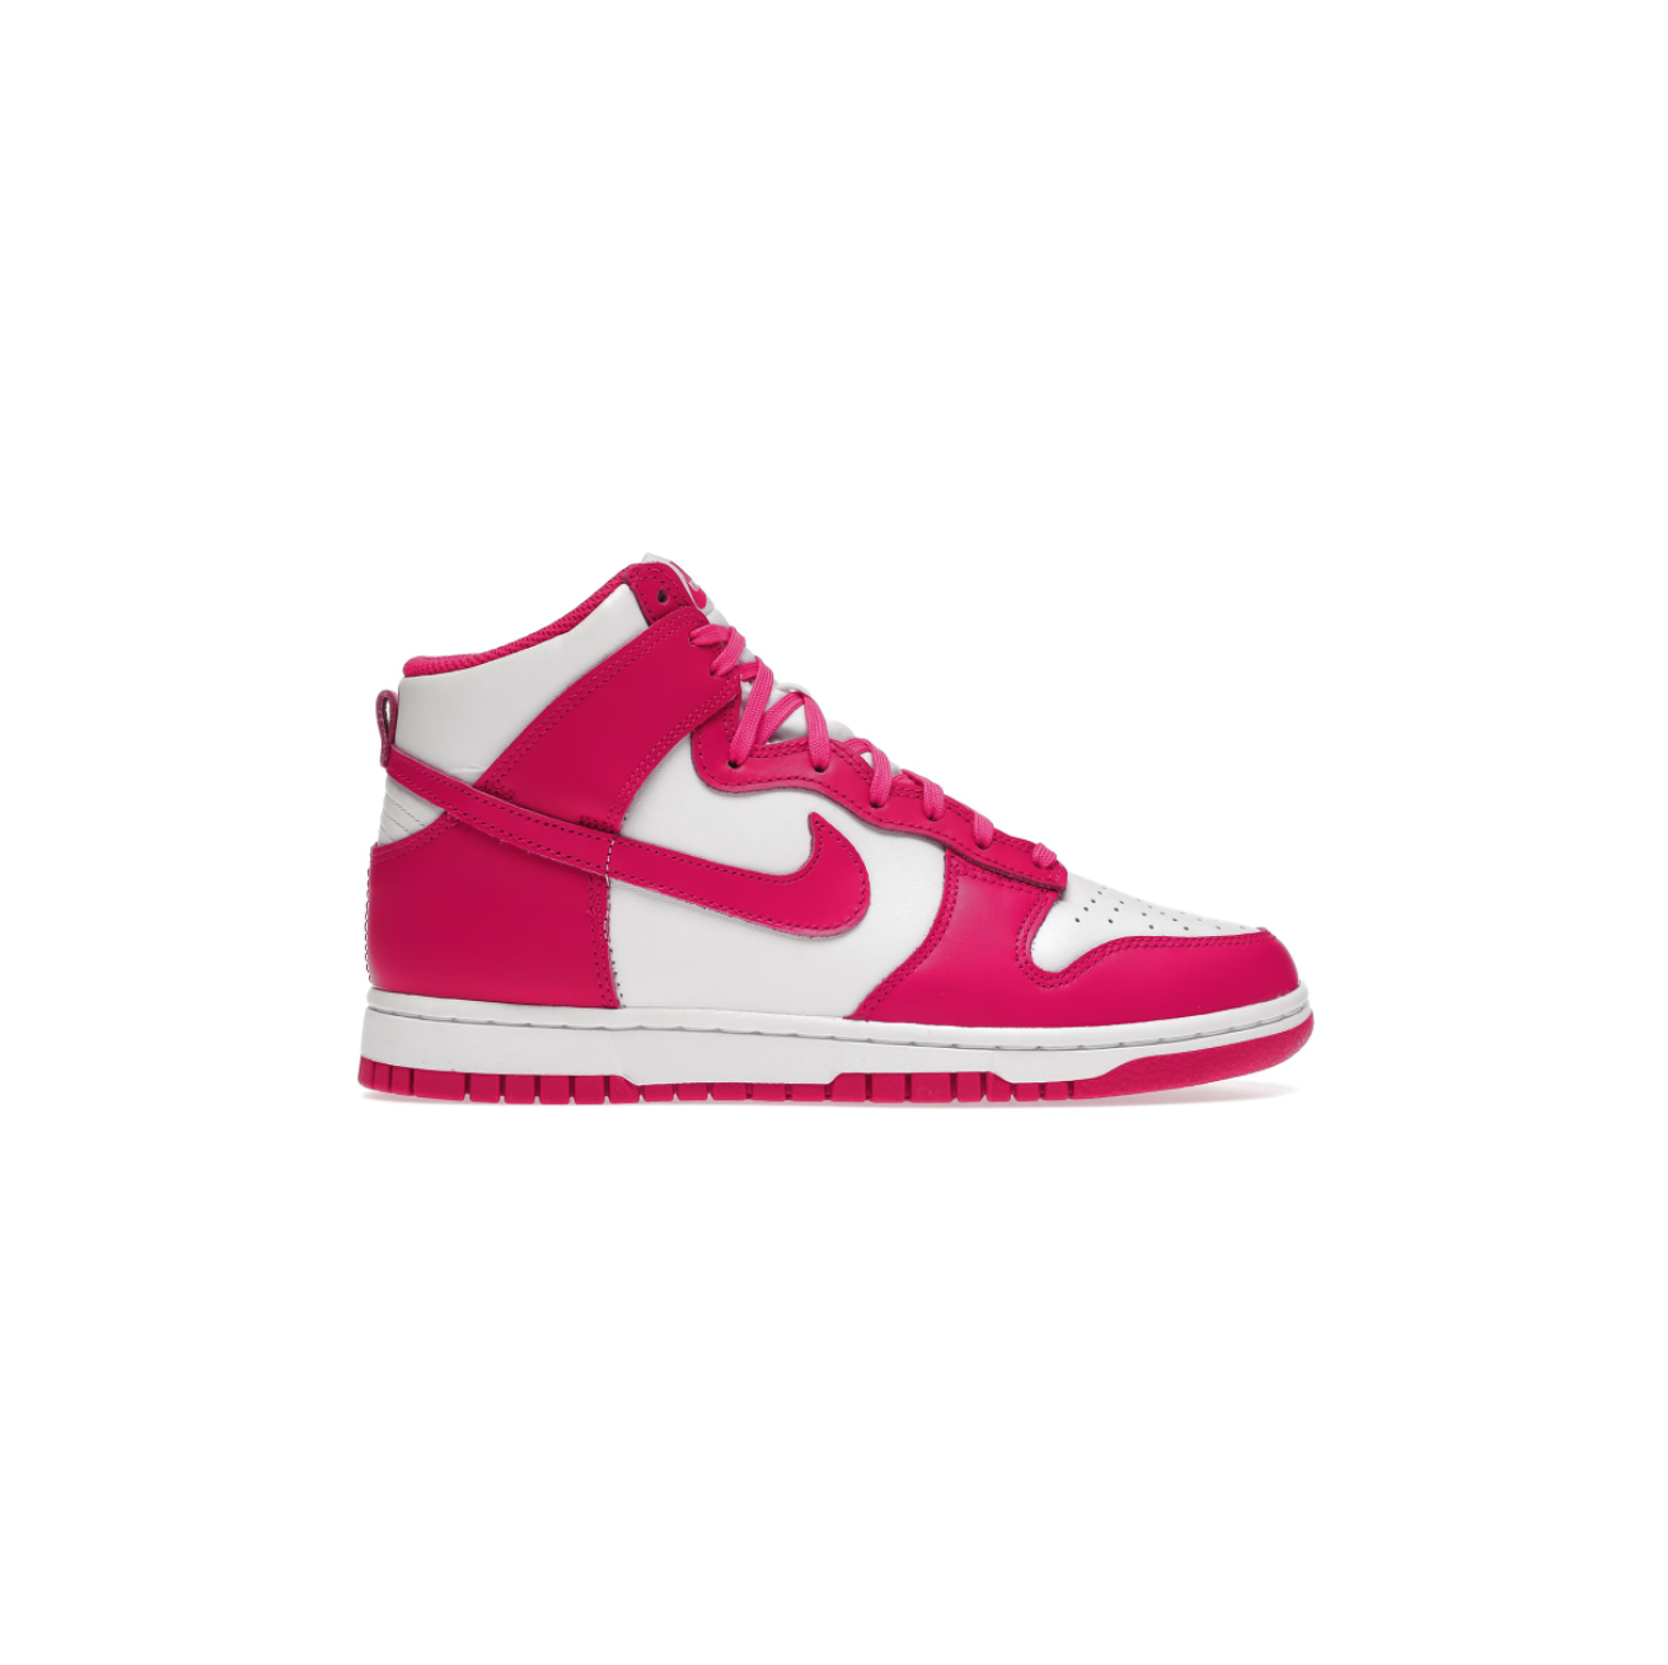 Nike Dunk High Pink Prime - Silhouette Sneakers & Art